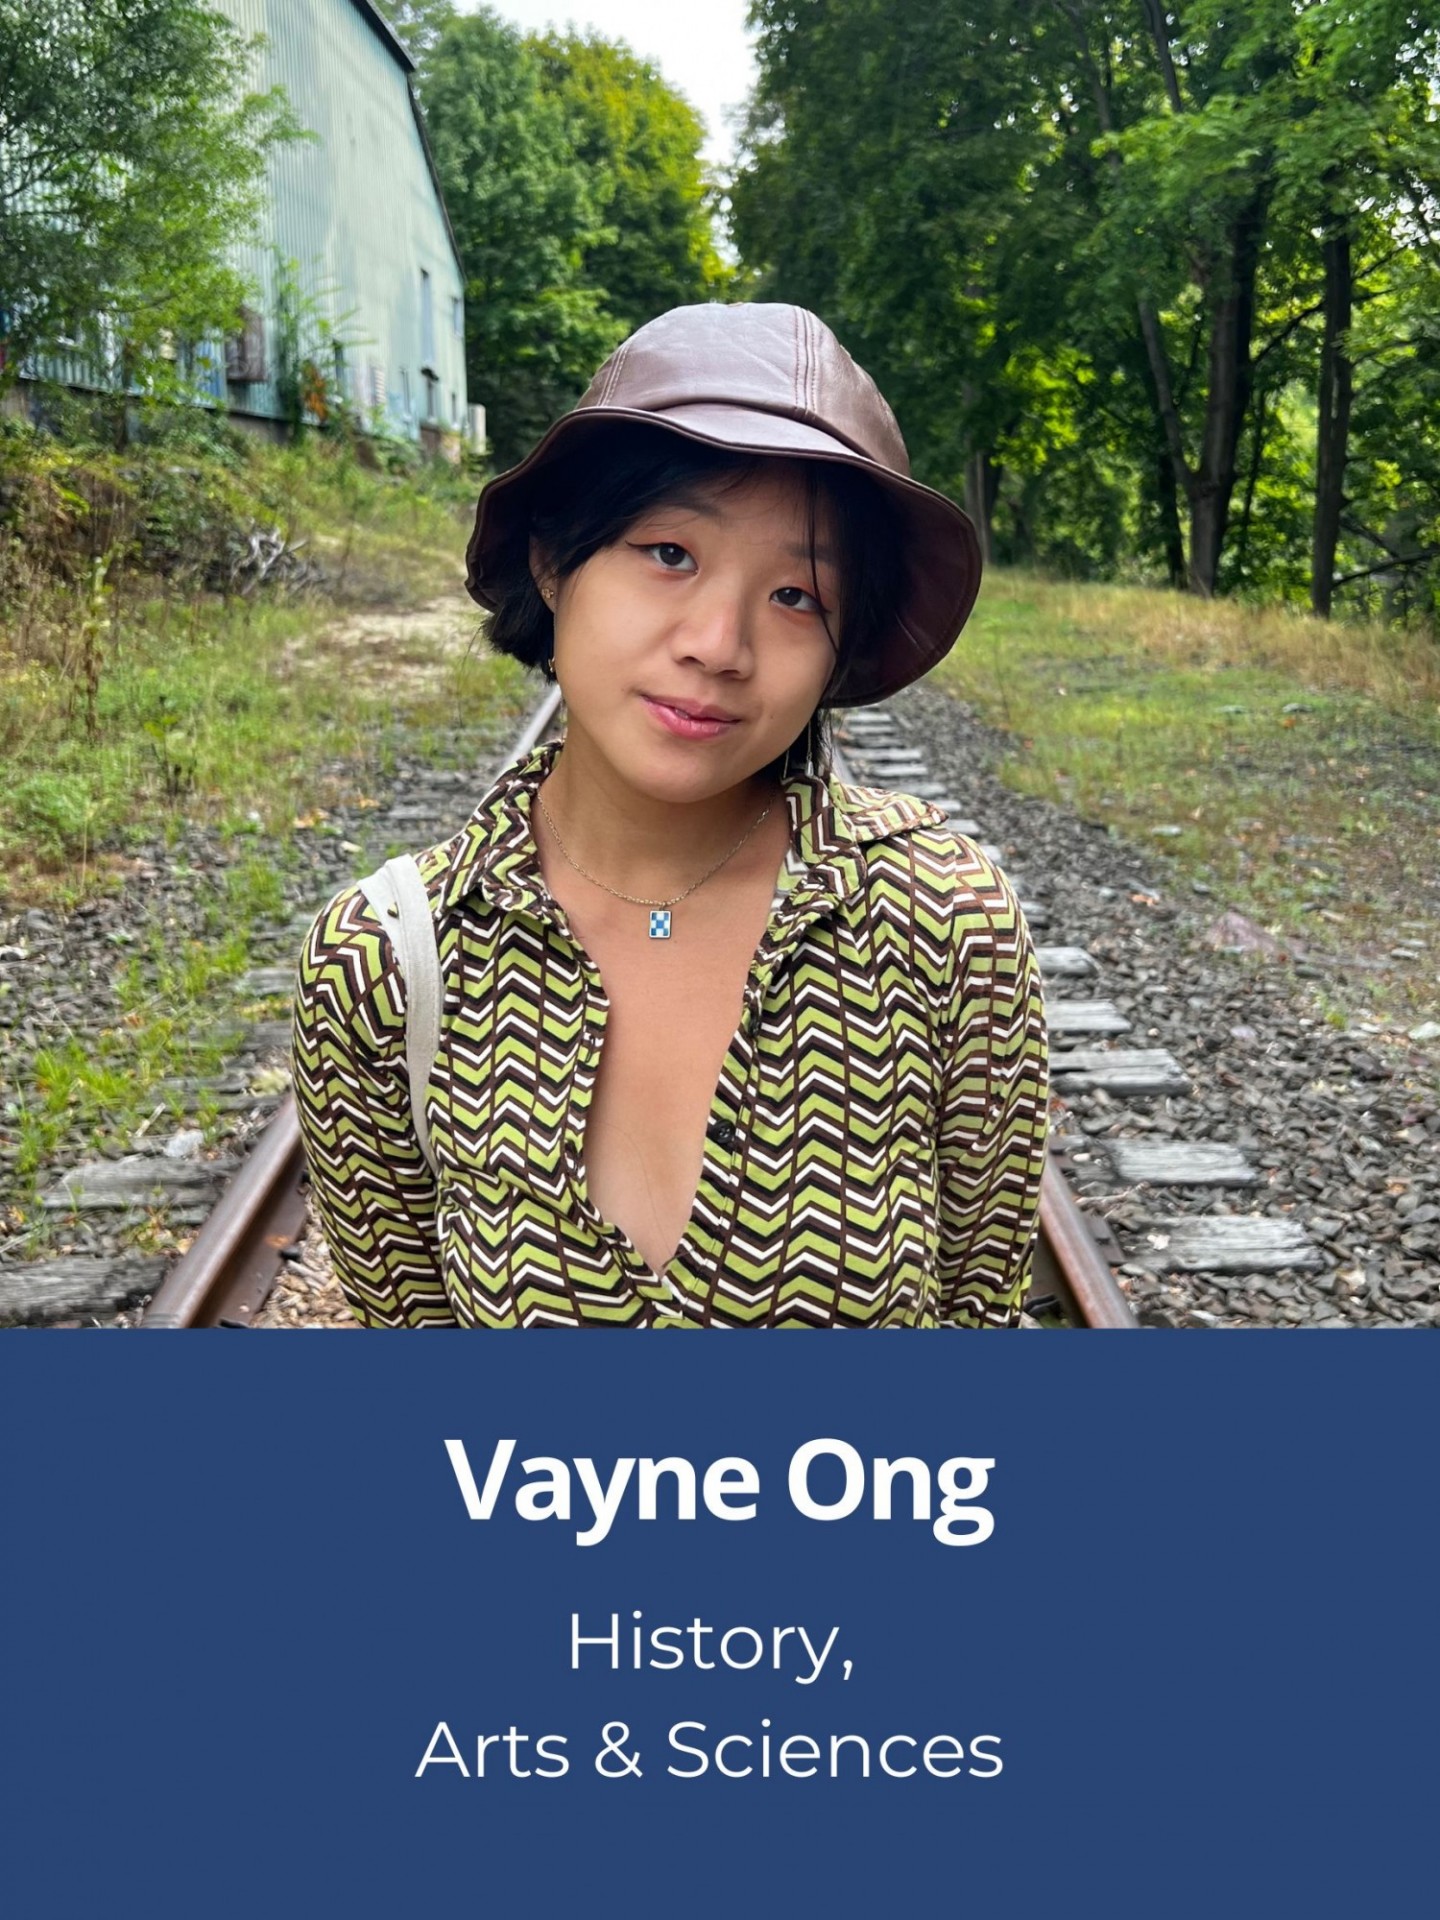 Headshot of Vaybe Ong with her name underneath